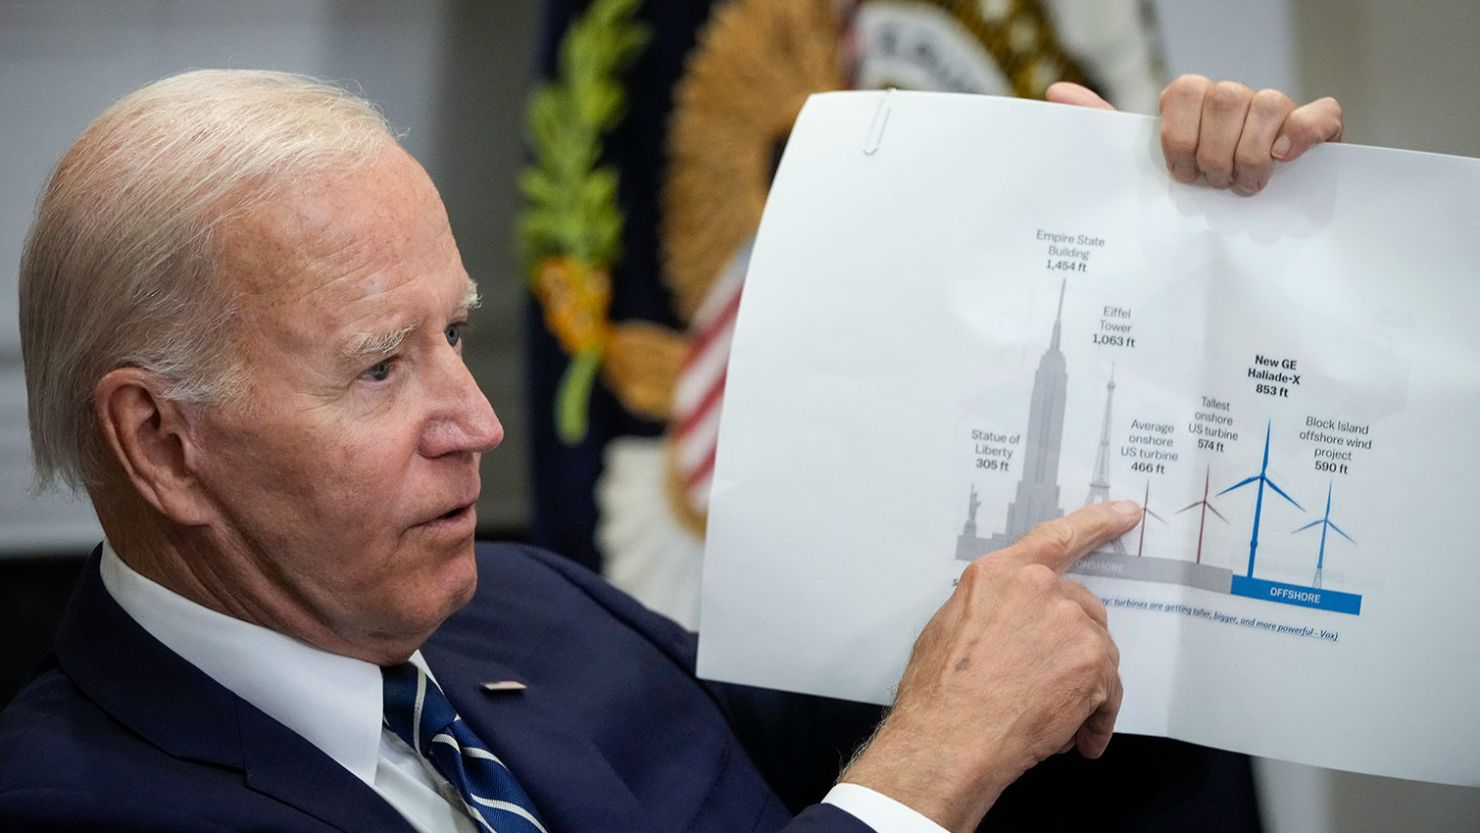 President Joe Biden points to a wind turbine size comparison chart during a meeting at the White House in June 2022.